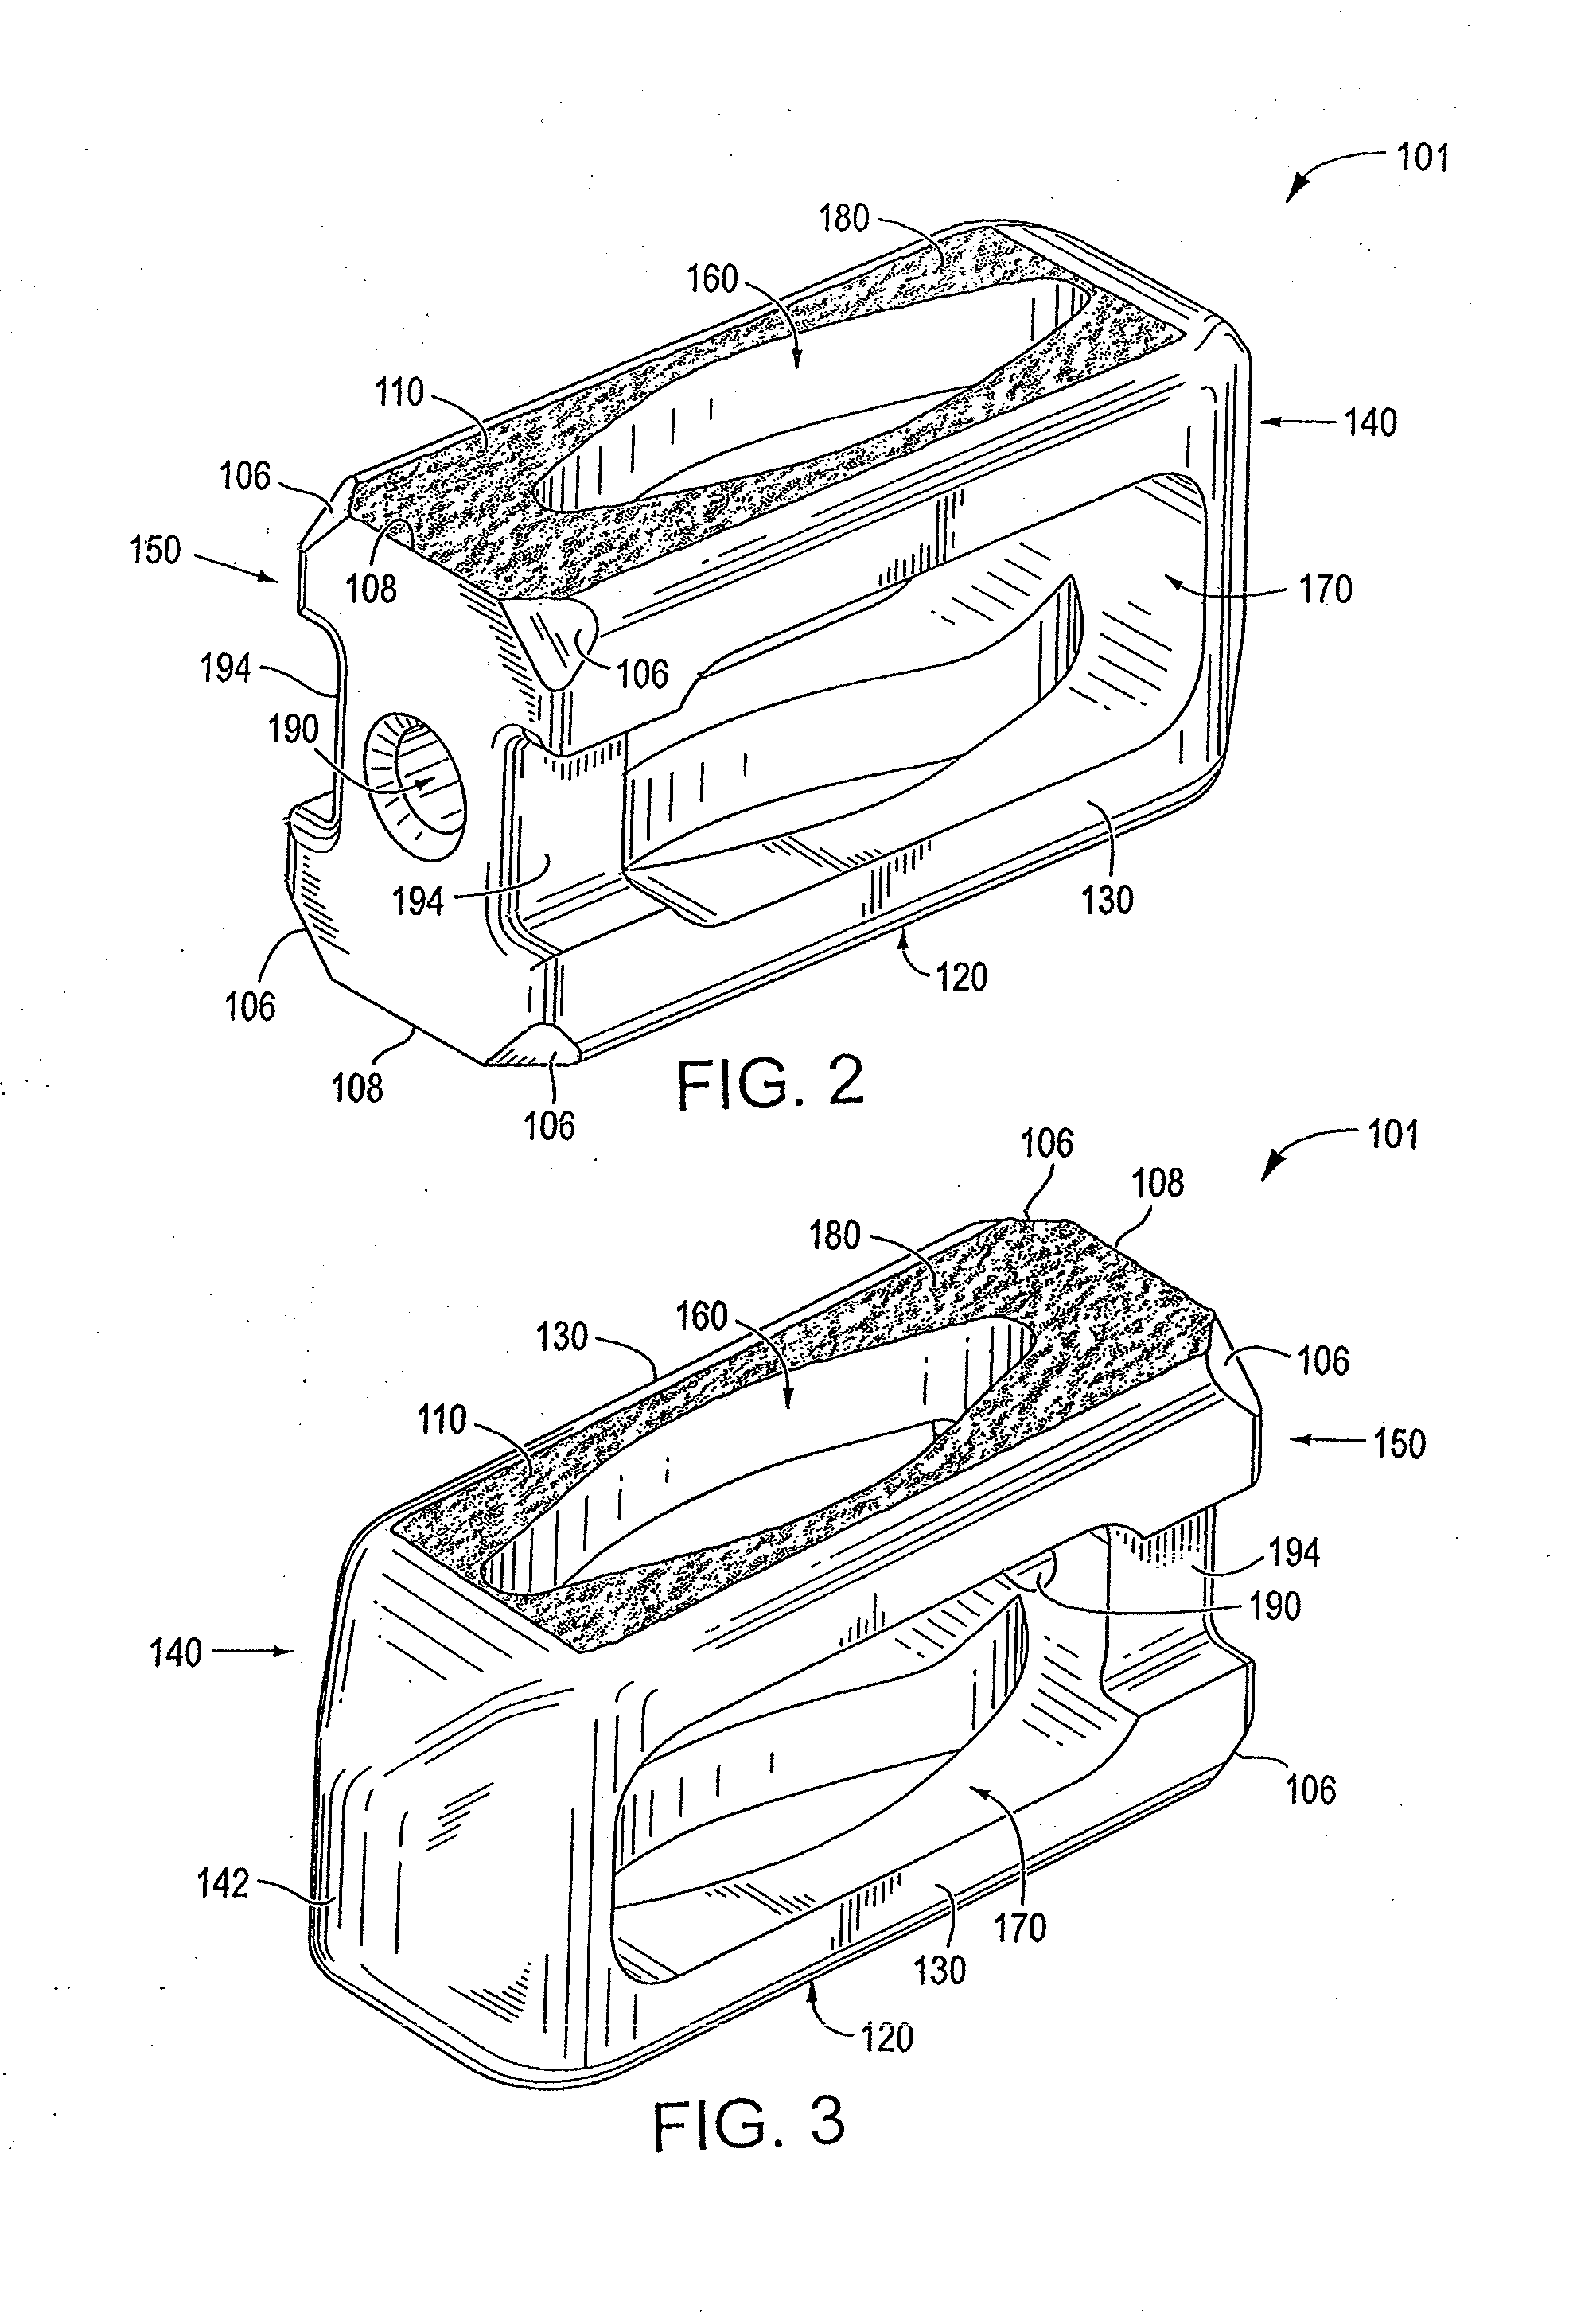 Endplate-preserving spinal implant with an integration plate having a roughened surface topography